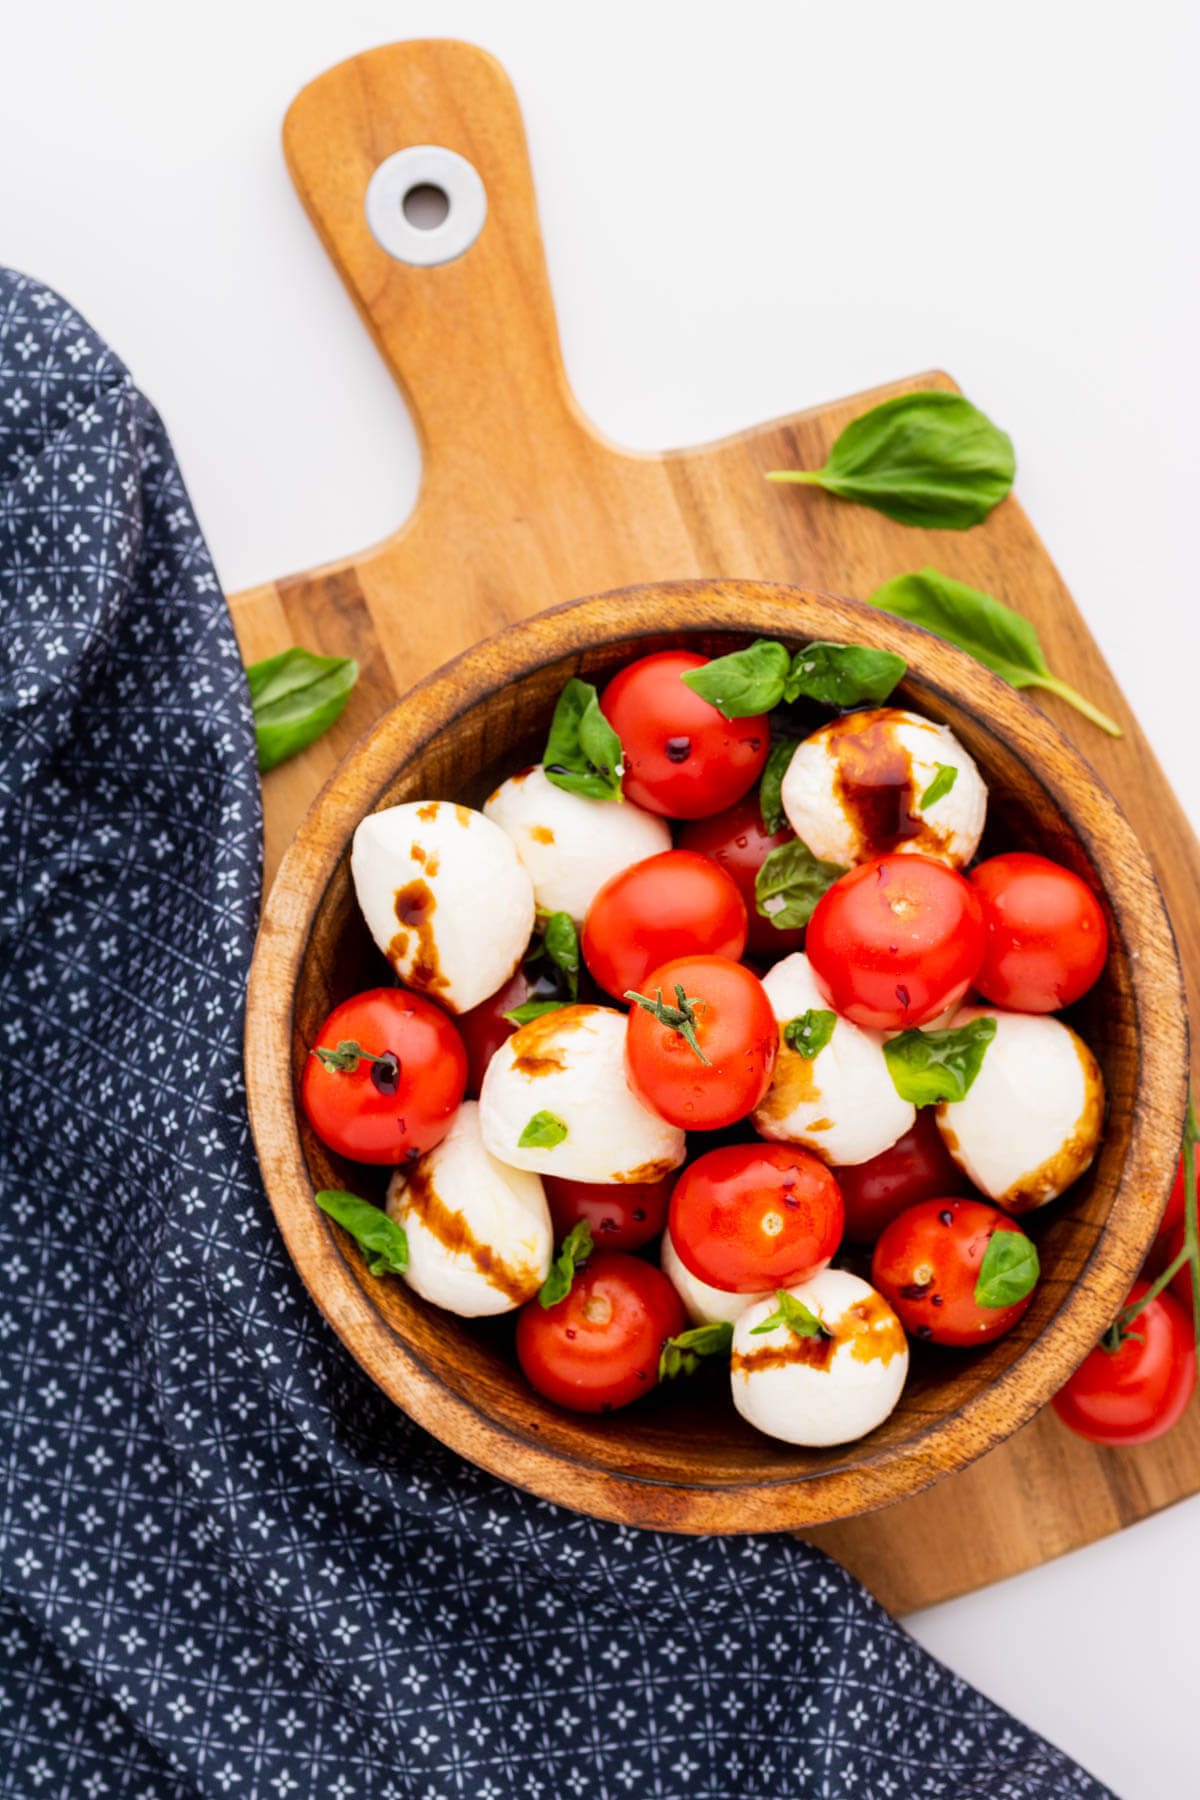 A wooden bowl filled with bright red cherry tomatoes, white mozzarella balls and green basil drizzled with olive oil and balsamic reduction.